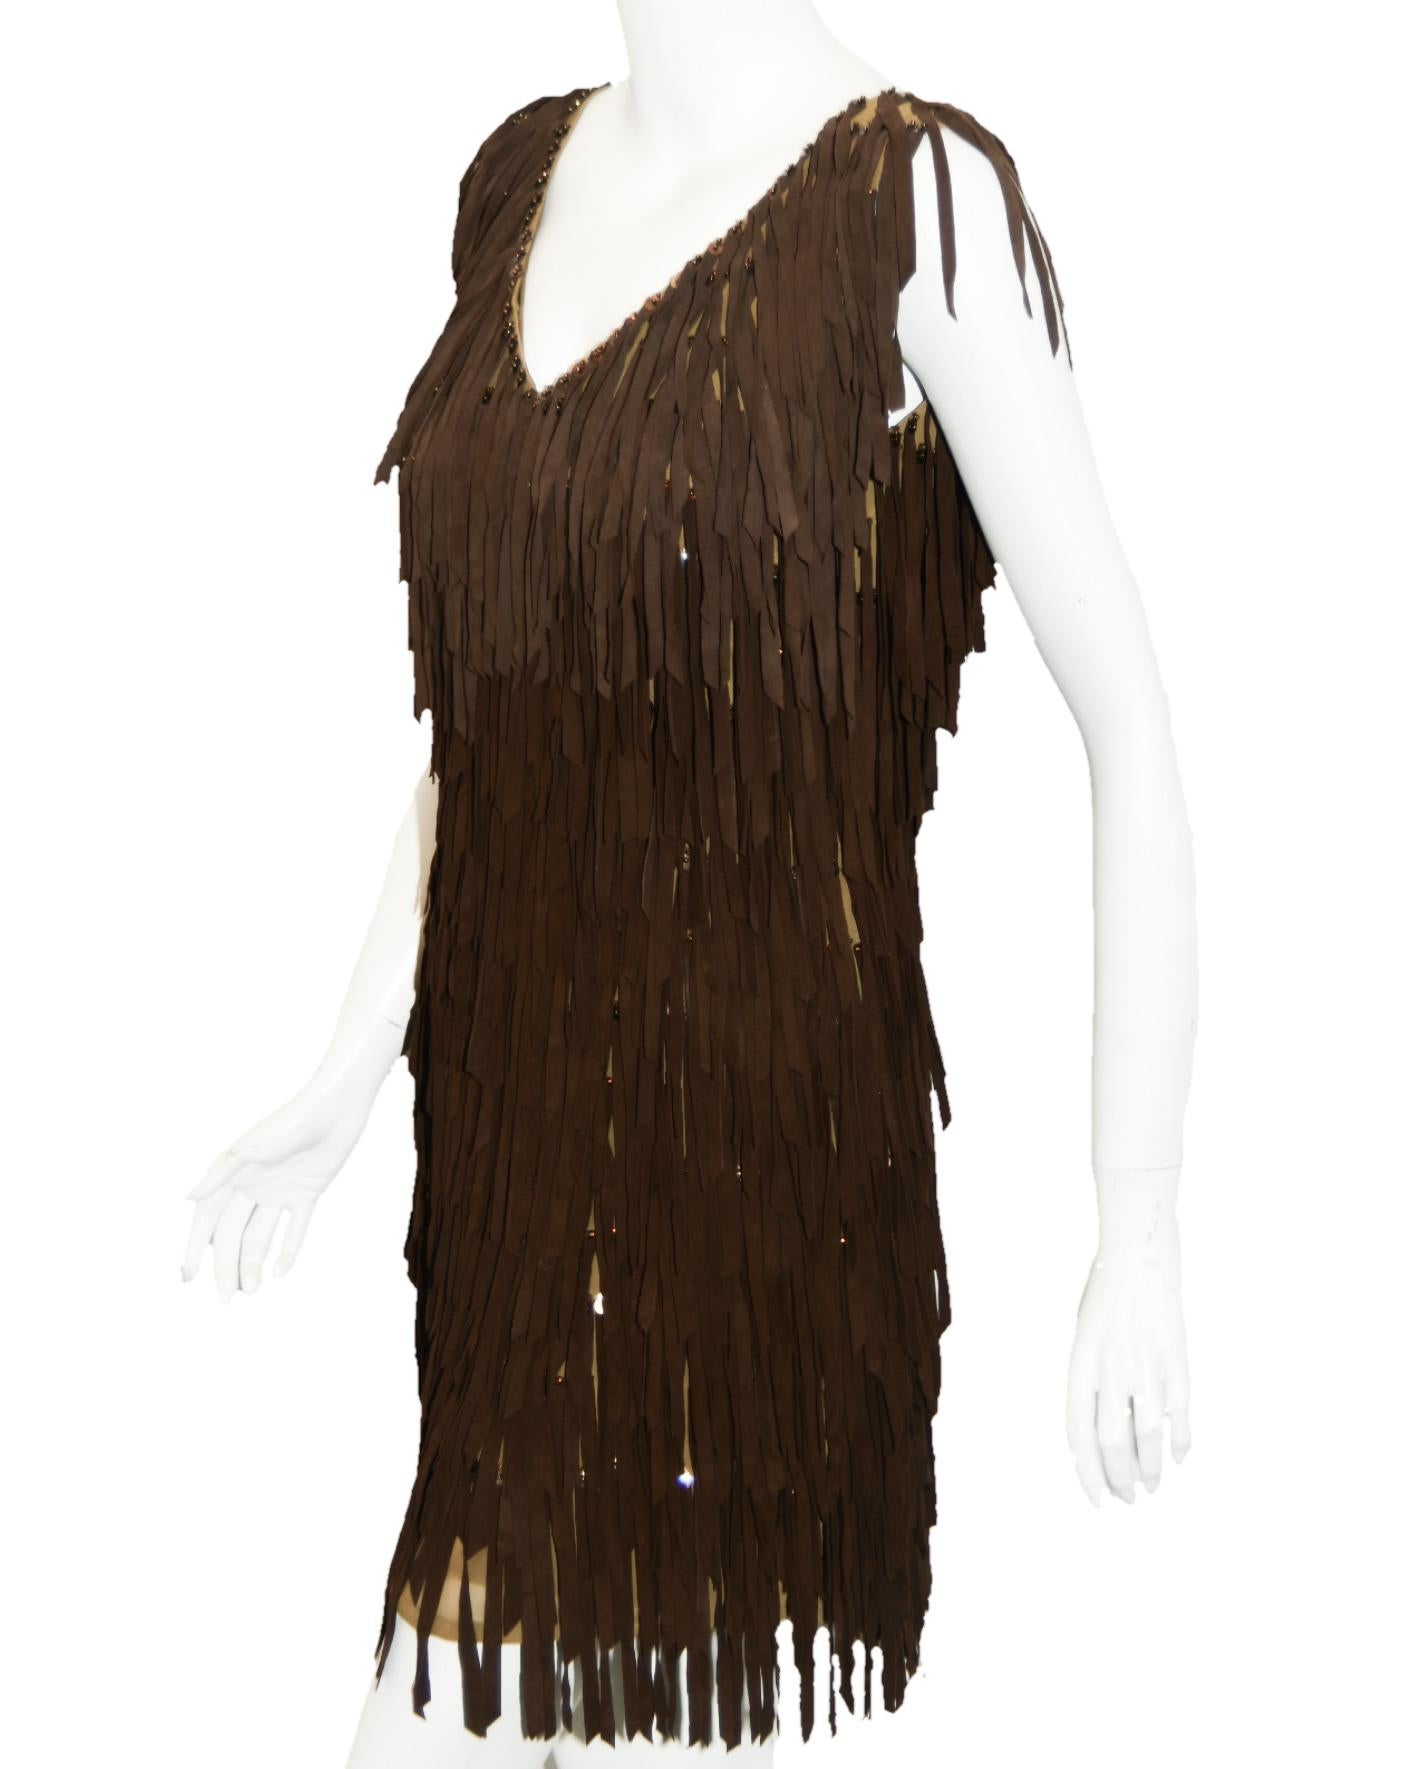 G-lish beaded fringe brown dress by which each fringe is individually attached to the tan silk chiffon dress with beads and sequins.  This gives the dress a finished handcrafted look.   Gabrielle Hoffman, after working with a number of top fashion